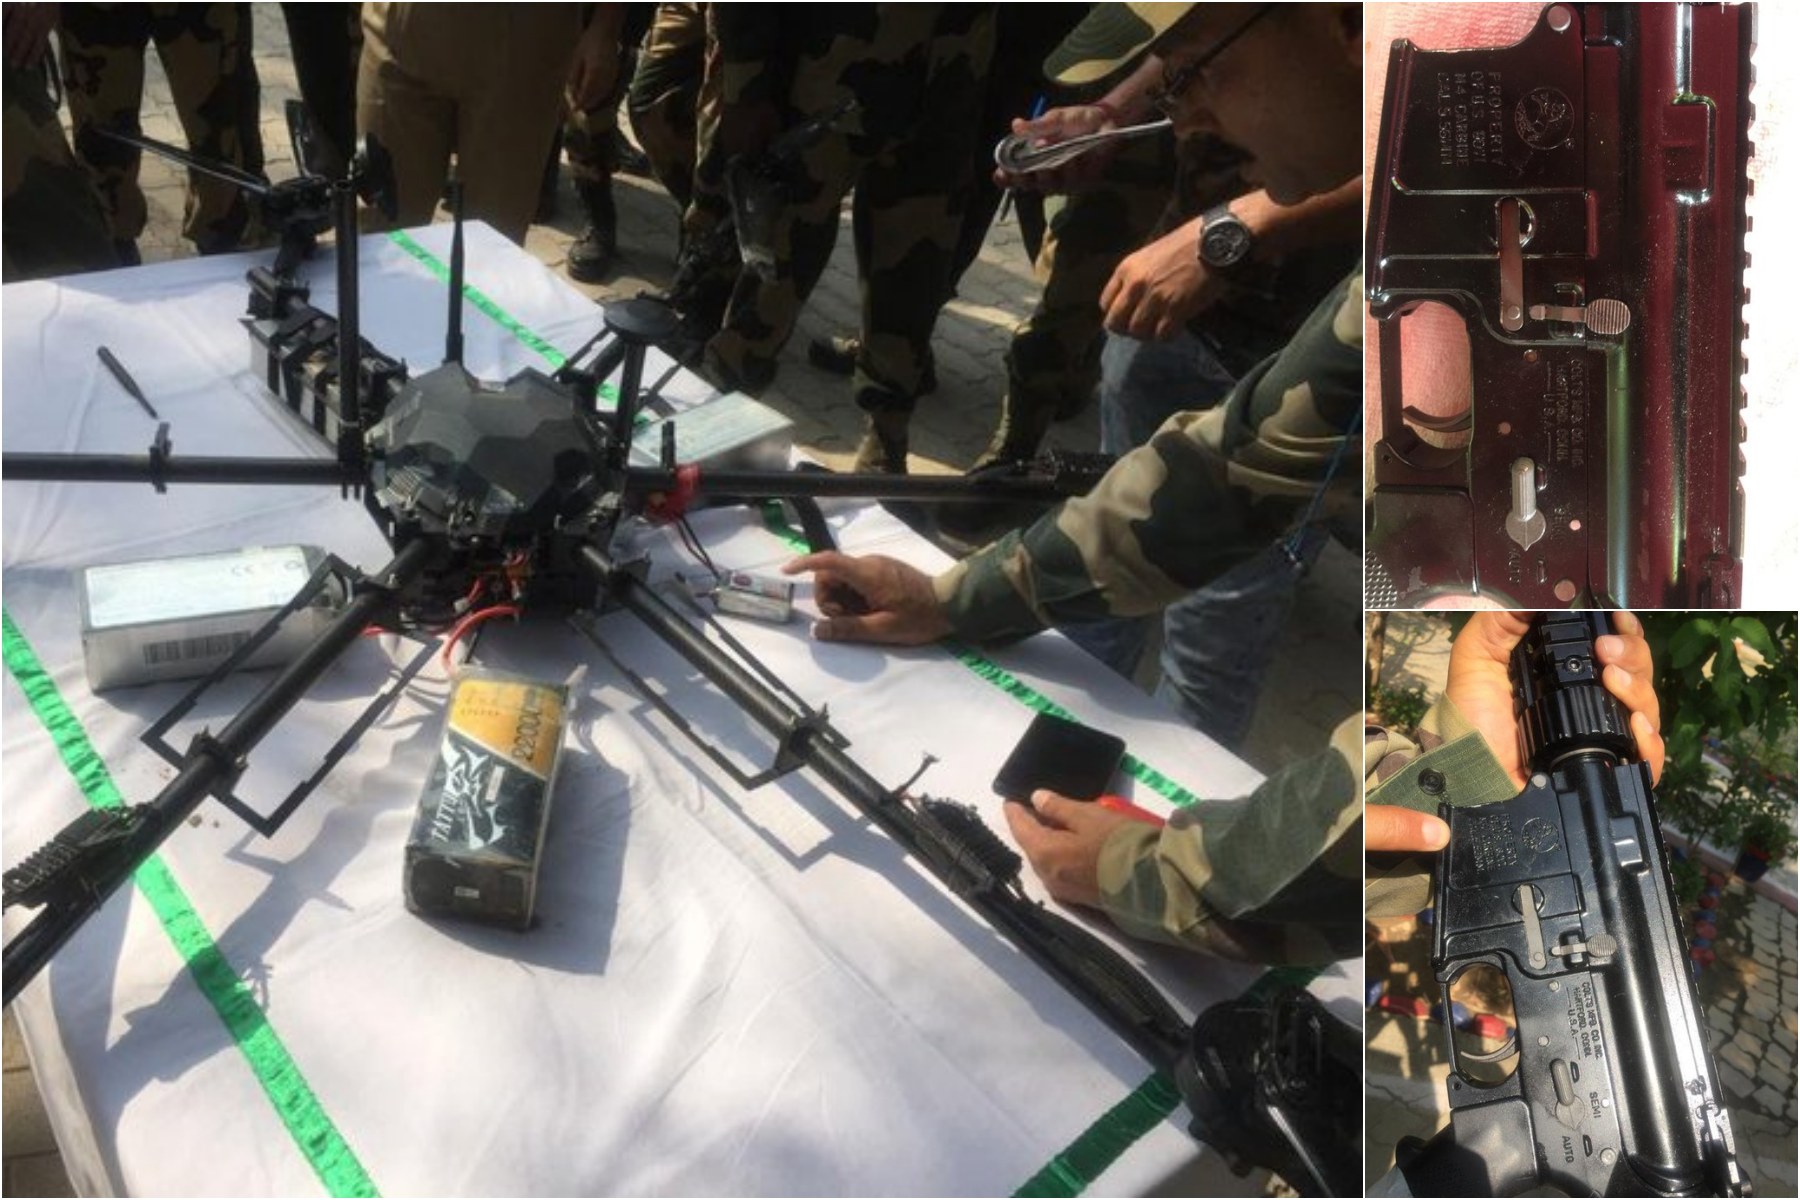 The weapons recovered from the drone